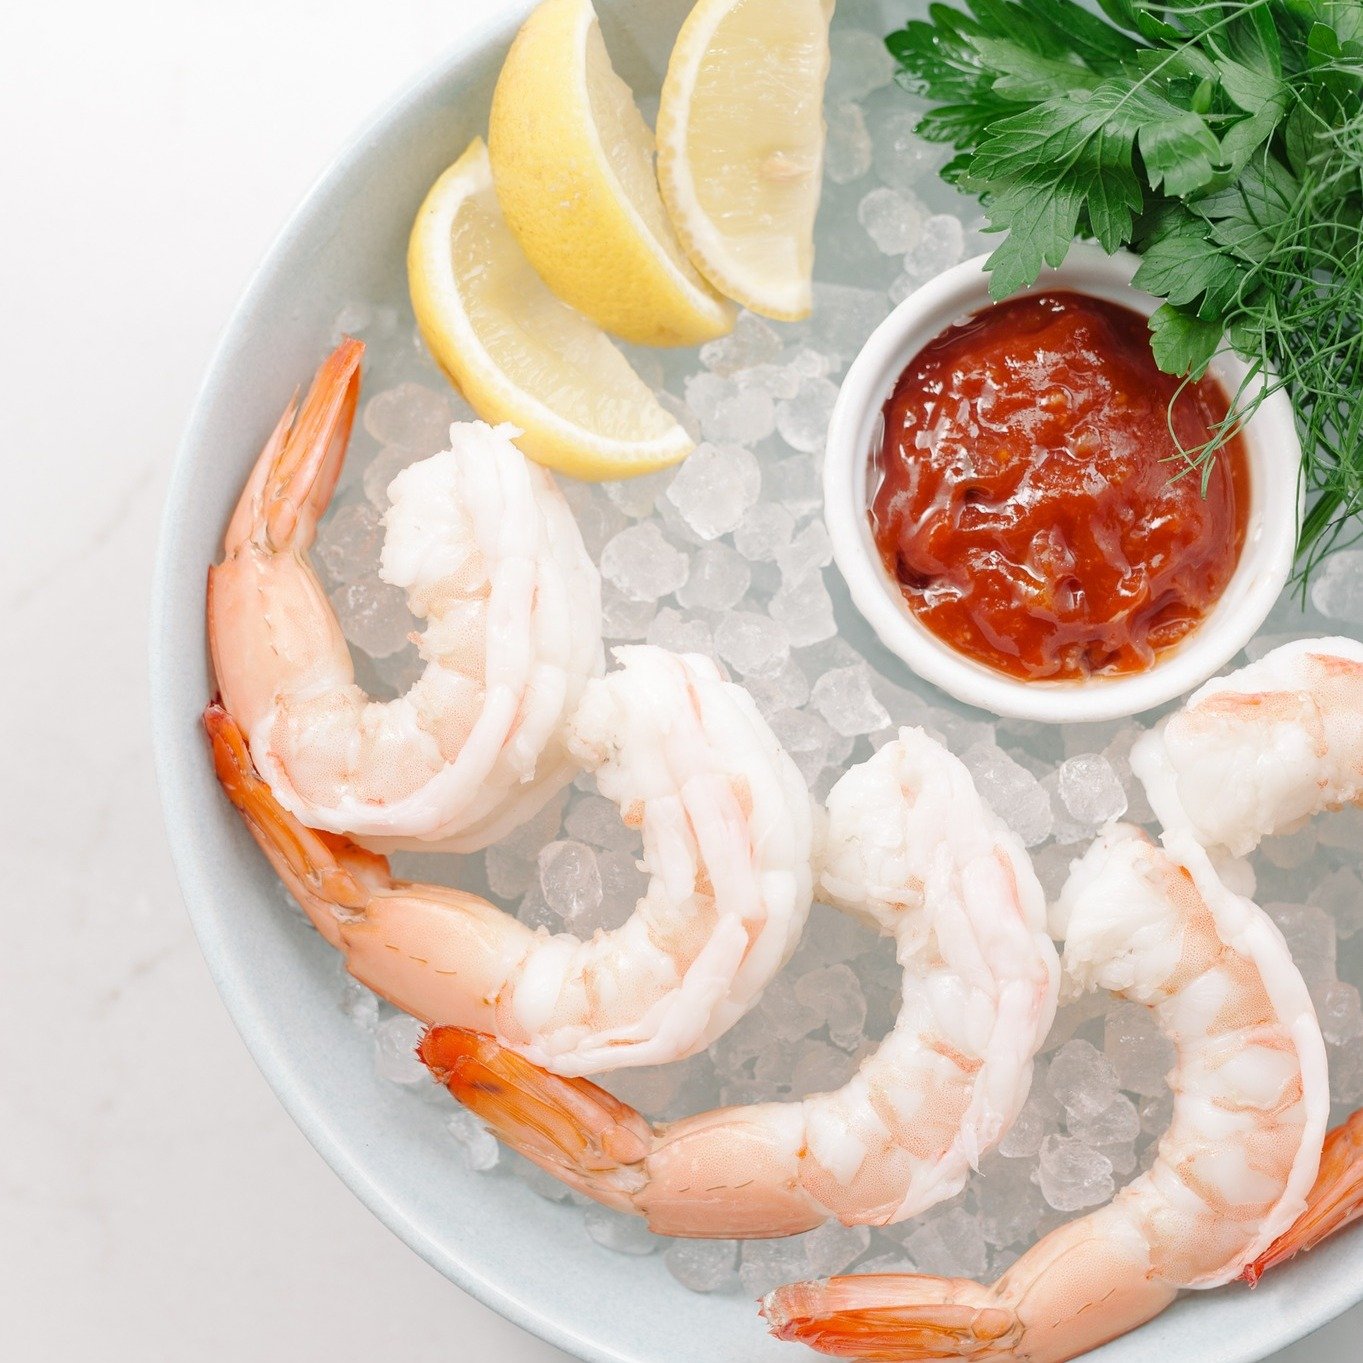 Lunch is a great way to get out of the office and enjoy some amazing seafood! Try our shrimp cocktail, it's a staff favorite 😄 🍤

#dineoutdowntown #downtownstaunton #blupointseafoodco #stauntonvafoodies #VisitVA #visitva #sdda #stauntonva #localsea